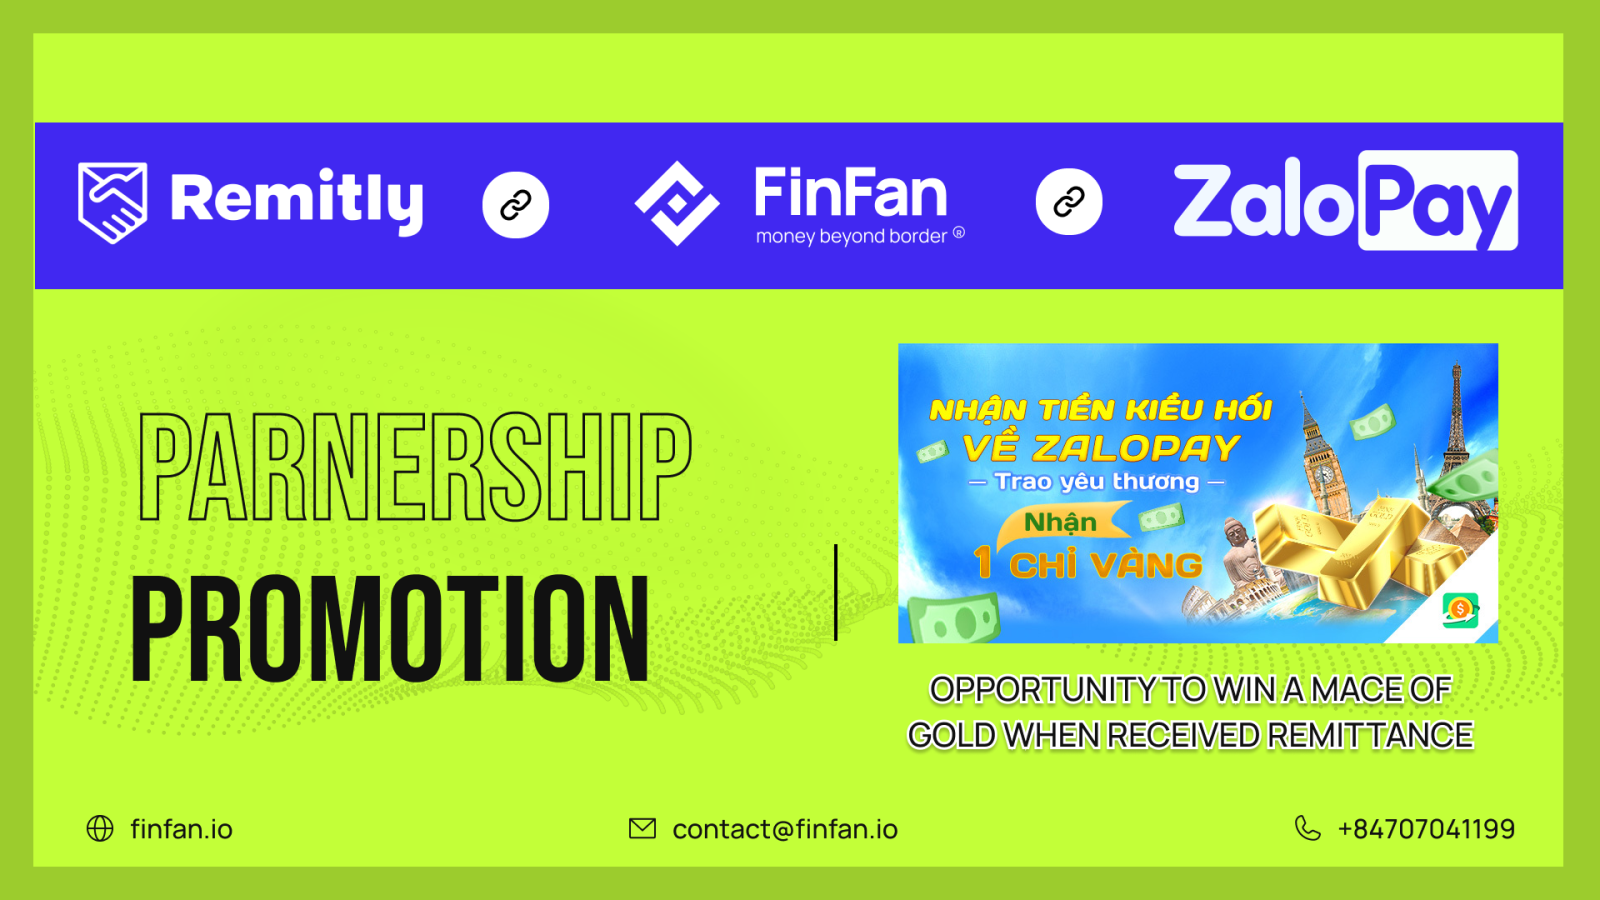 Special promotion from Zalo Pay in August and September - Remitly